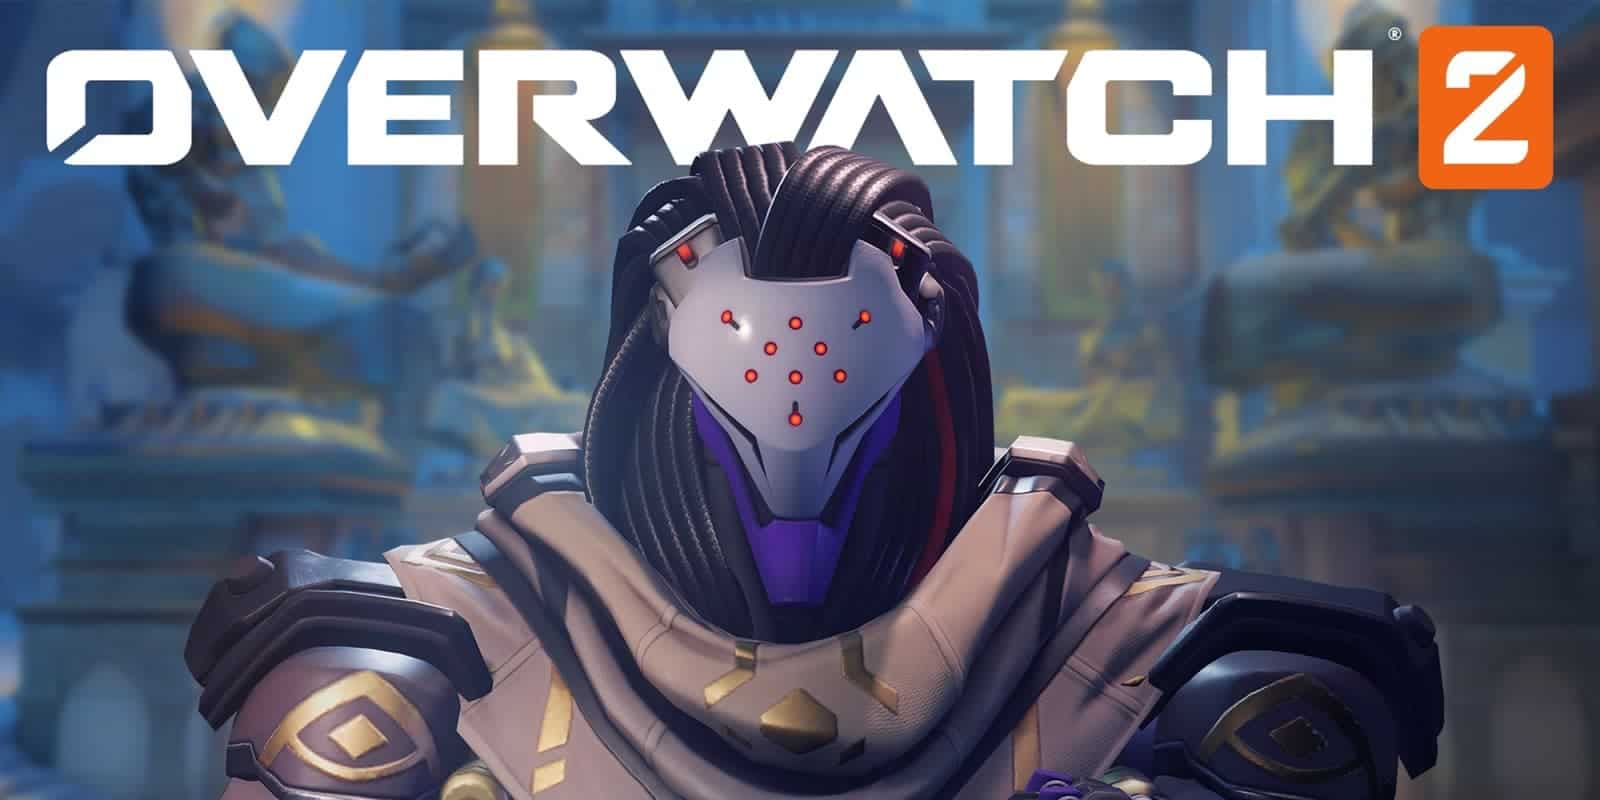 Is Overwatch 2 available on Mac